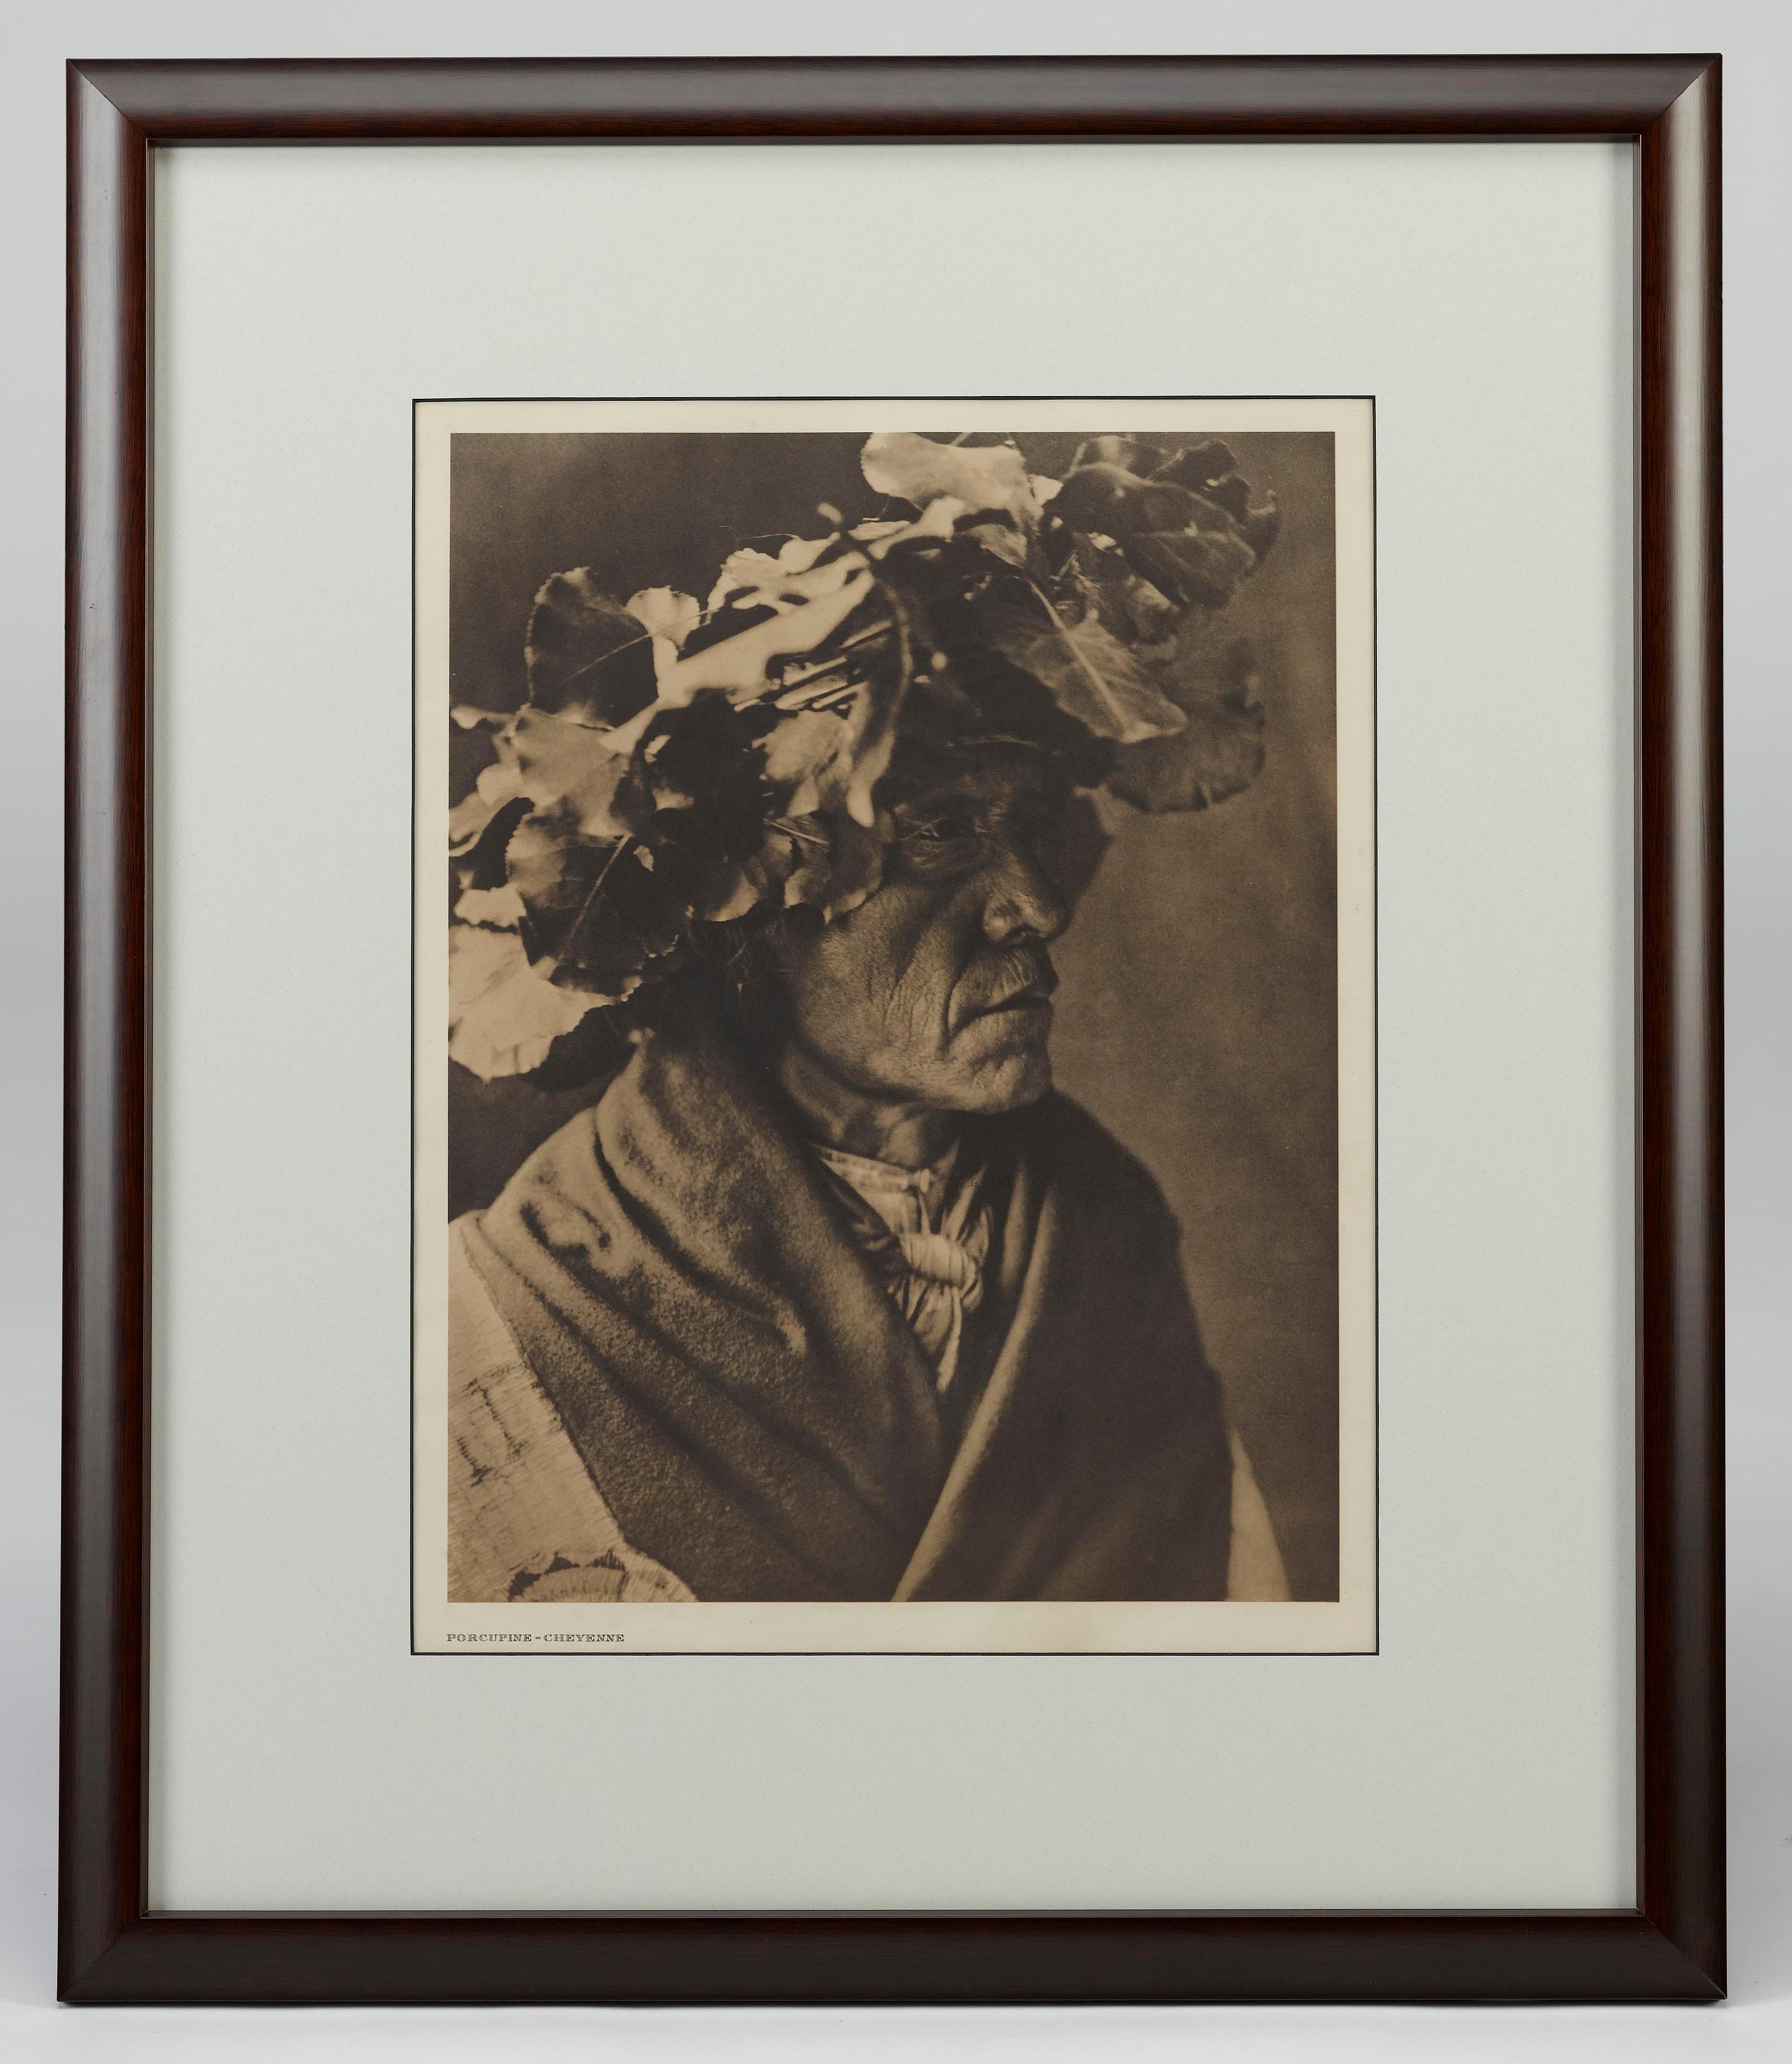 Presented is a fine photogravure portrait of a Cheyenne man with cottonwood leave headdress by Edward Curtis. The image is Plate 216 from Supplementary Portfolio 6 of Edward Curtis' epic project The North American Indian. The sixth portfolio volume